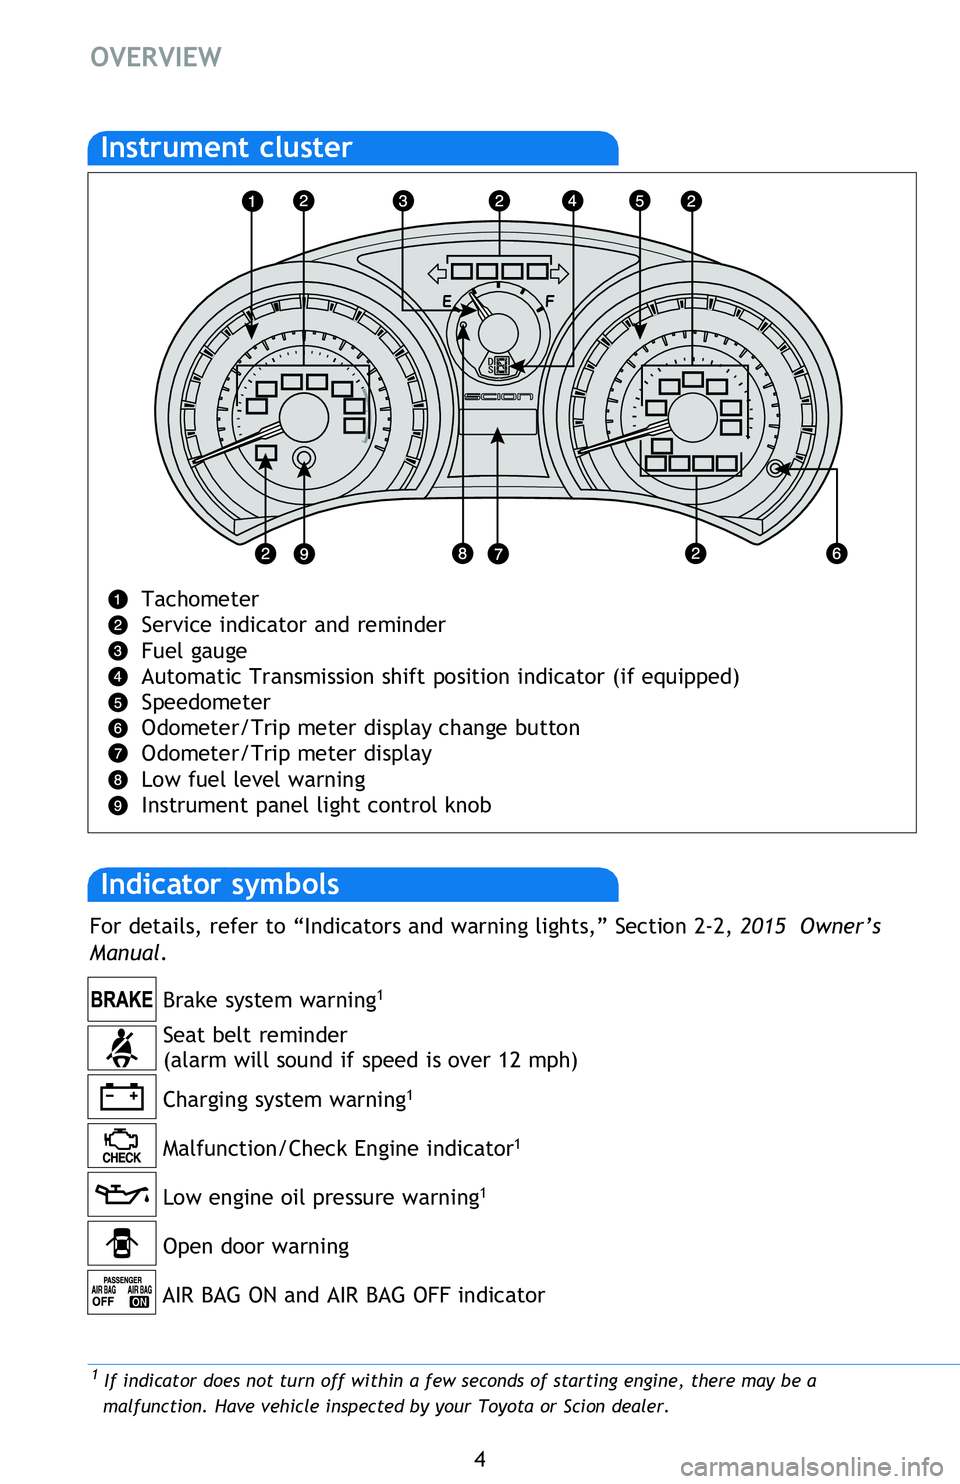 TOYOTA tC 2015  Owners Manual (in English) 4
OVERVIEW
2 If this light flashes, refer to “Cruise control” Section 2-4, 2015 Owner’s Manual.
Tachometer  
Service indicator and reminder
Fuel gauge
Automatic Transmission shift position indic